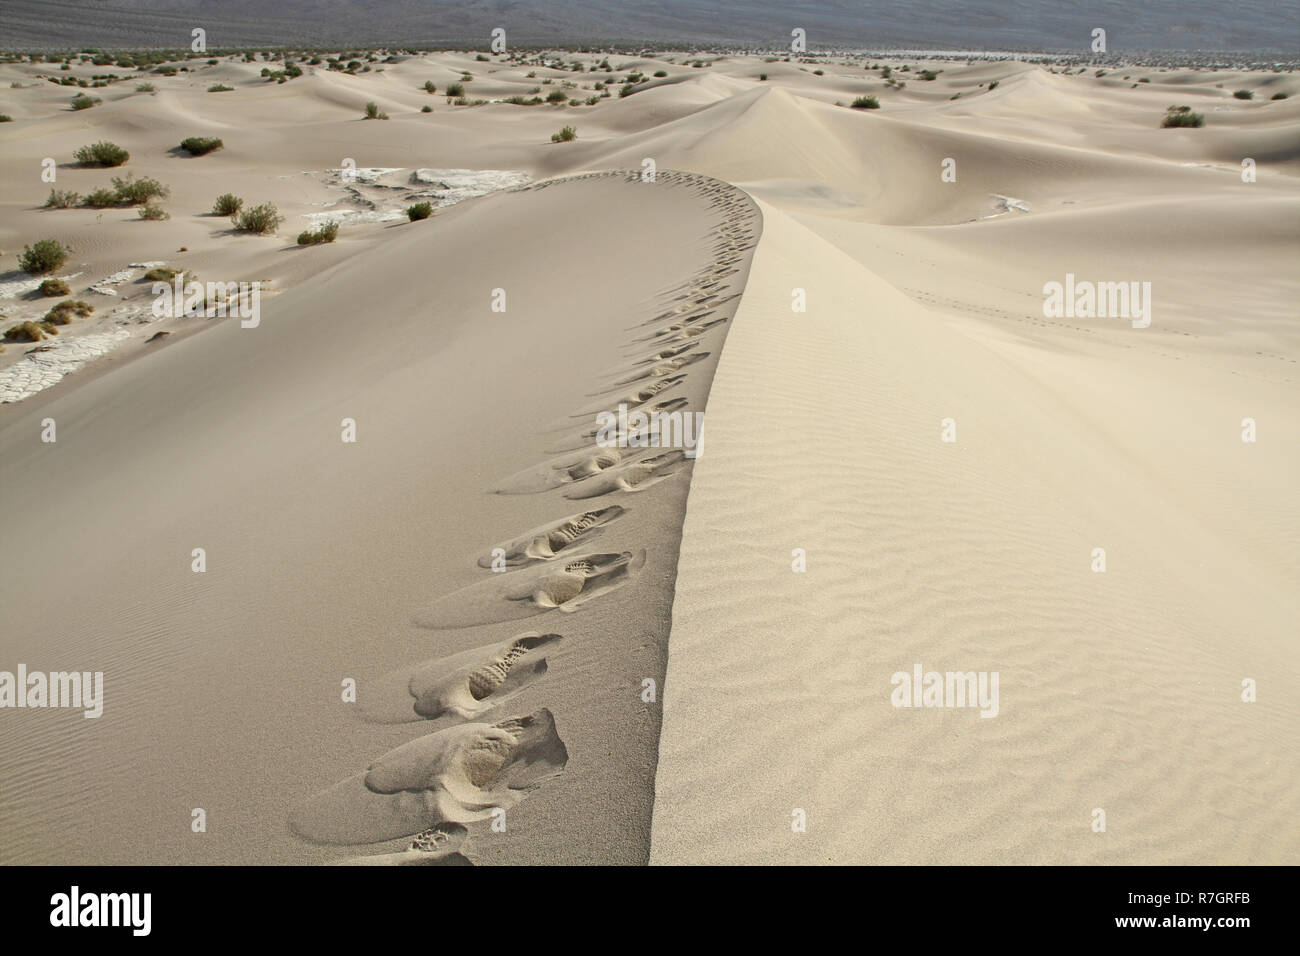 Sand dunes with human foot prints along a dune crest Stock Photo